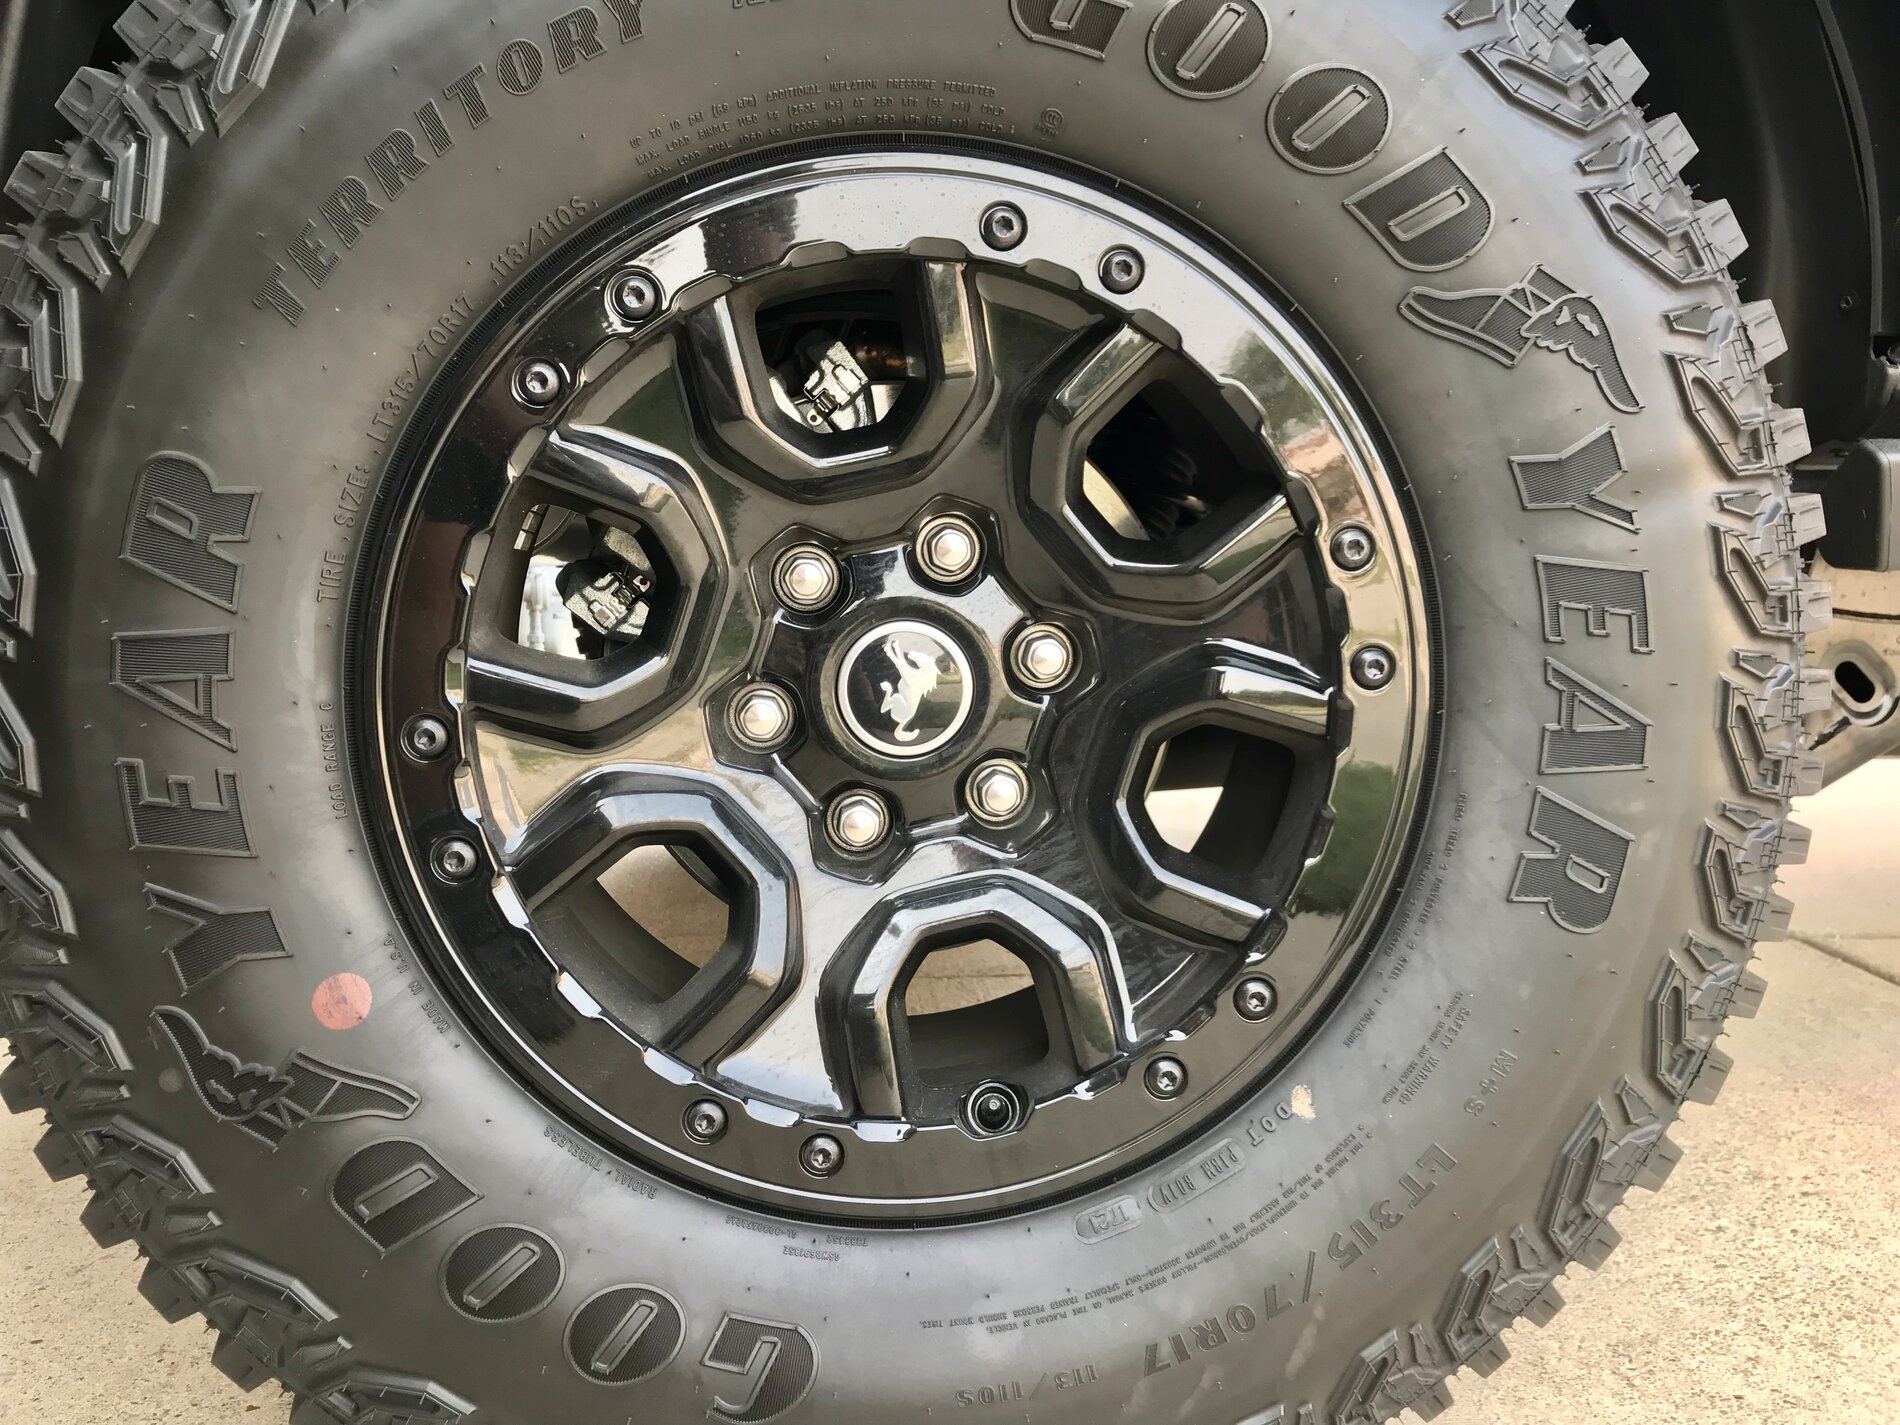 Ford Bronco DIY How-To: Painting Beadlock Wheel Beauty Ring From Silver to Black (on Badlands Sasquatch) FE62E1A8-9E8B-45EA-AE15-740EFC58DB0C